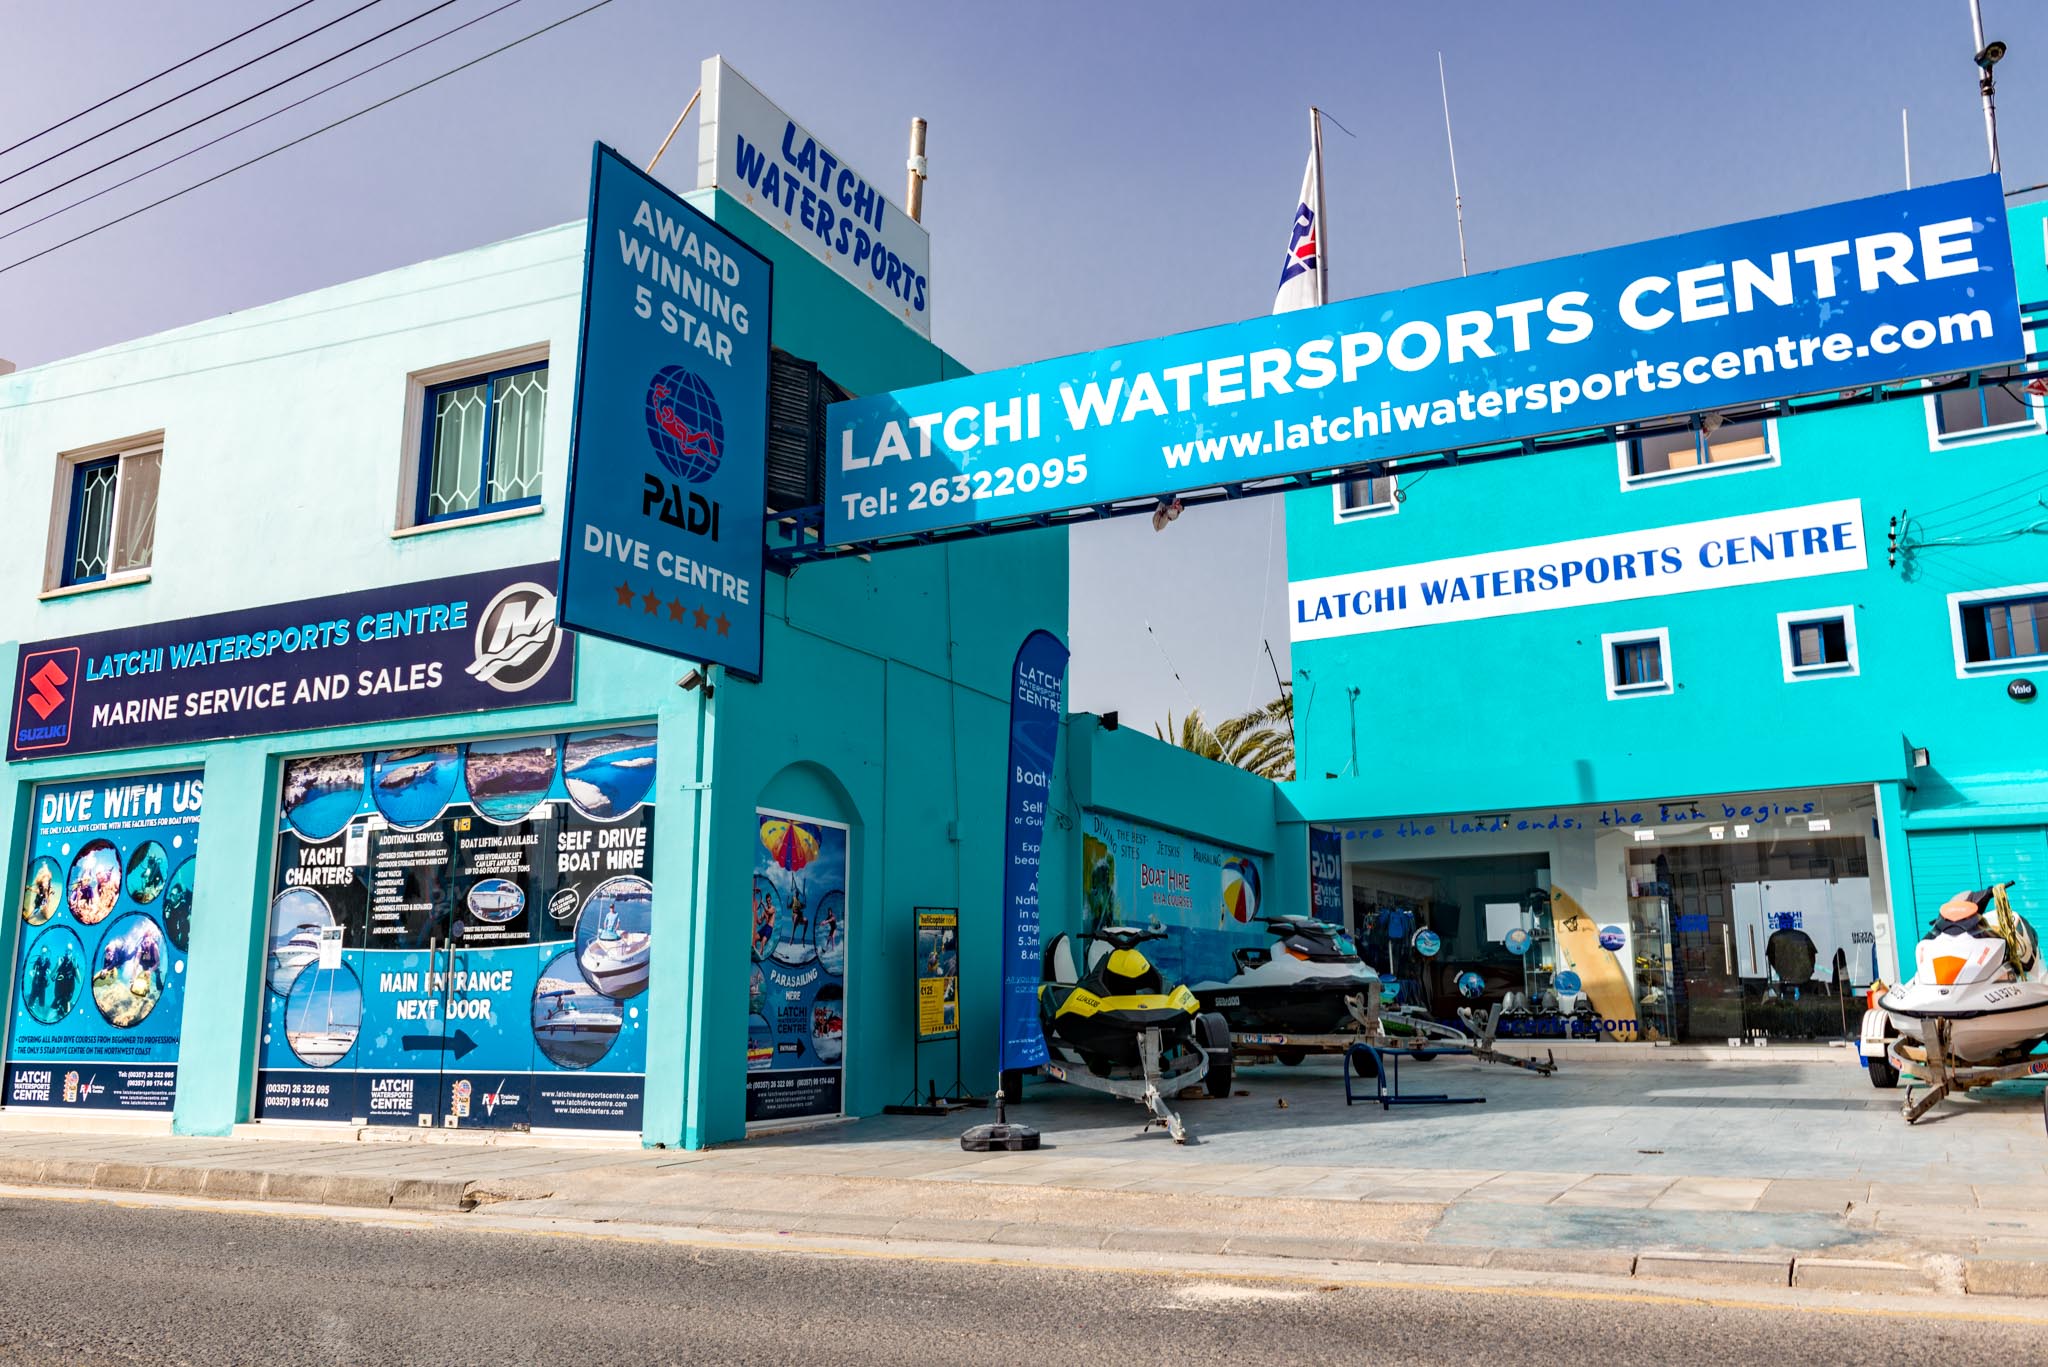 Latchi Water sports Centre